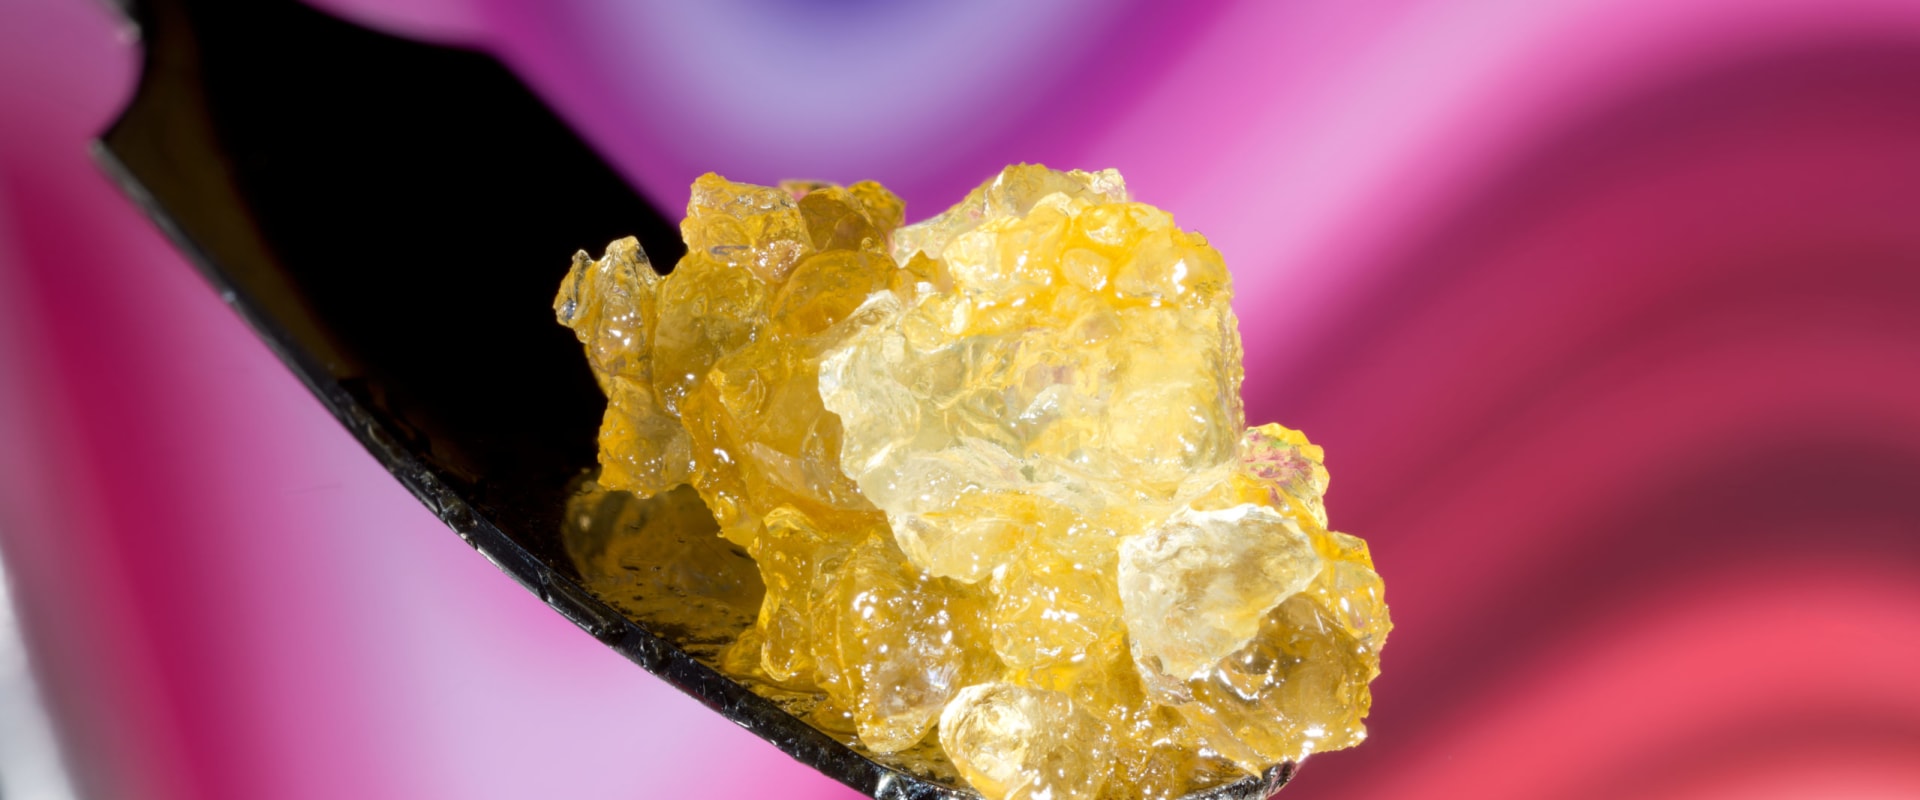 Are there any risks associated with making your own wax thc at home?